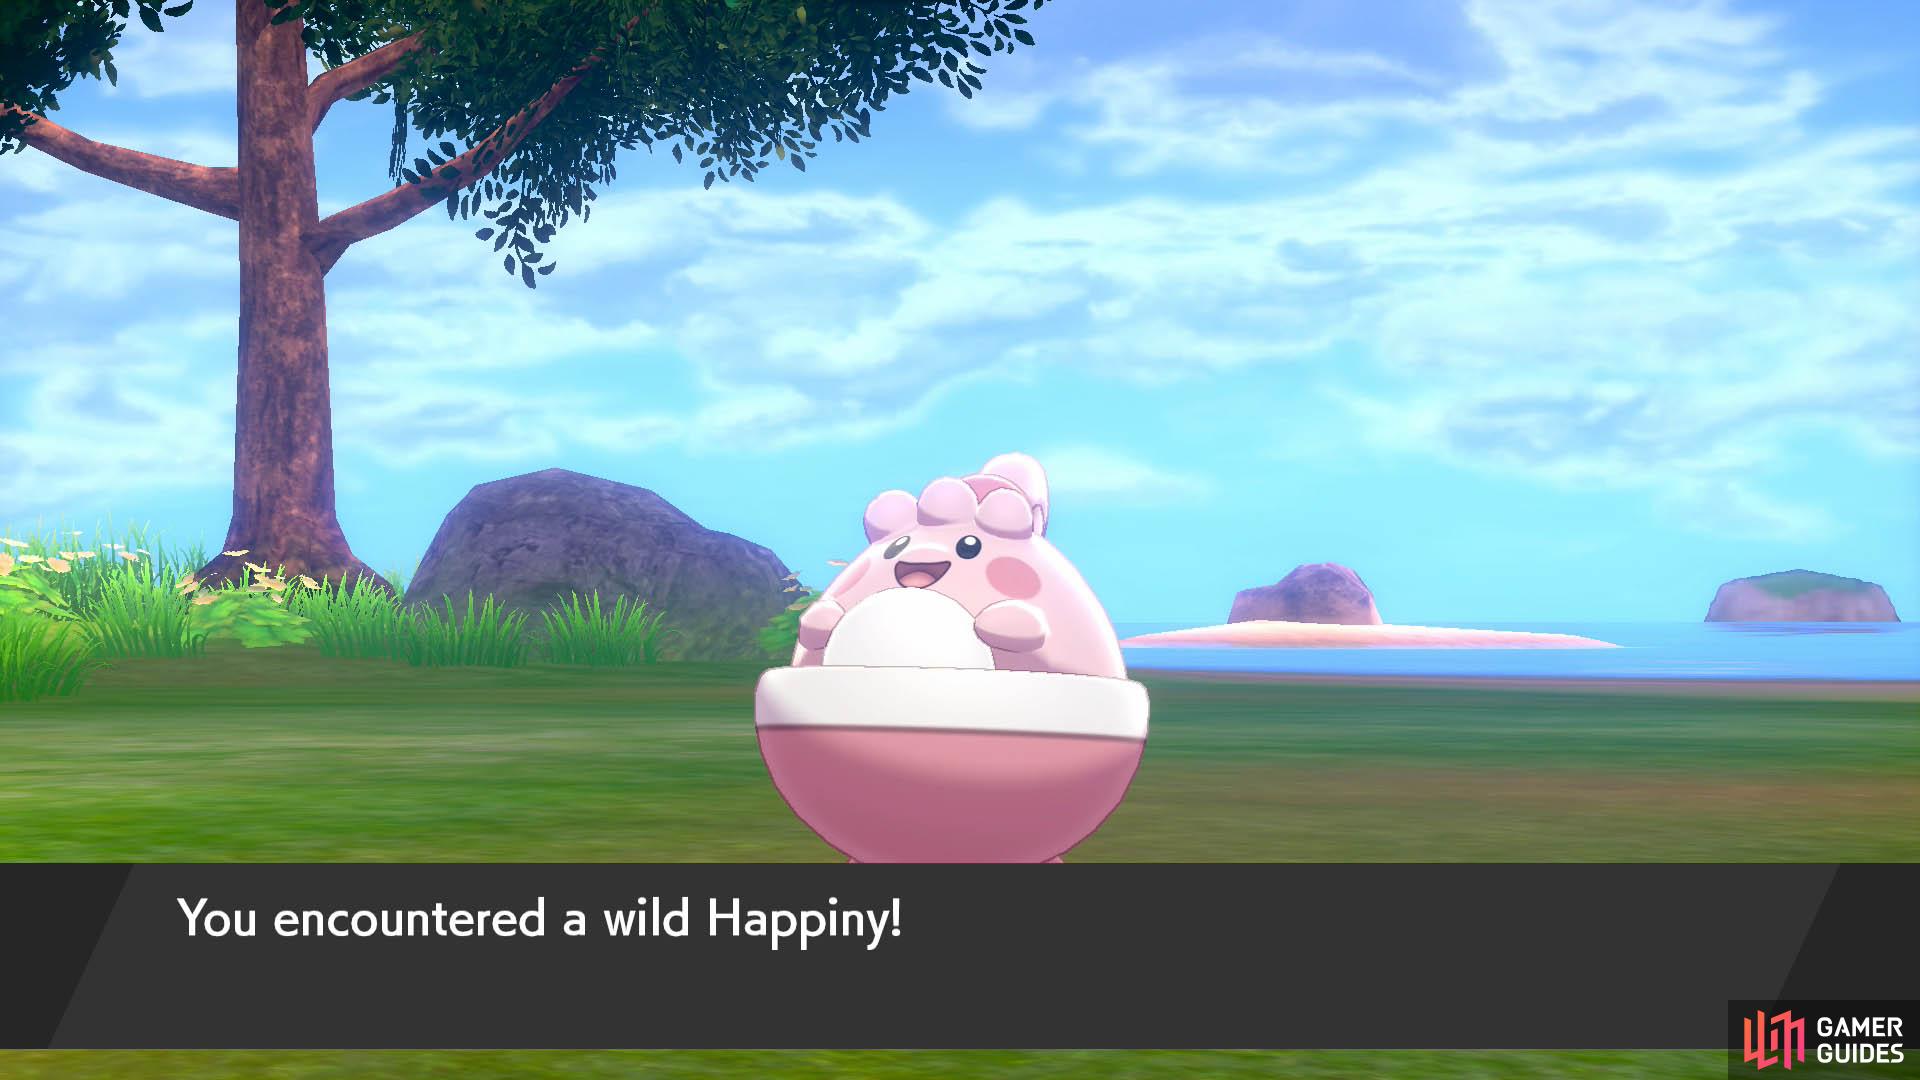 There's a 1 in 10 chance of finding a Happiny, if you'd rather not breed Chansey.